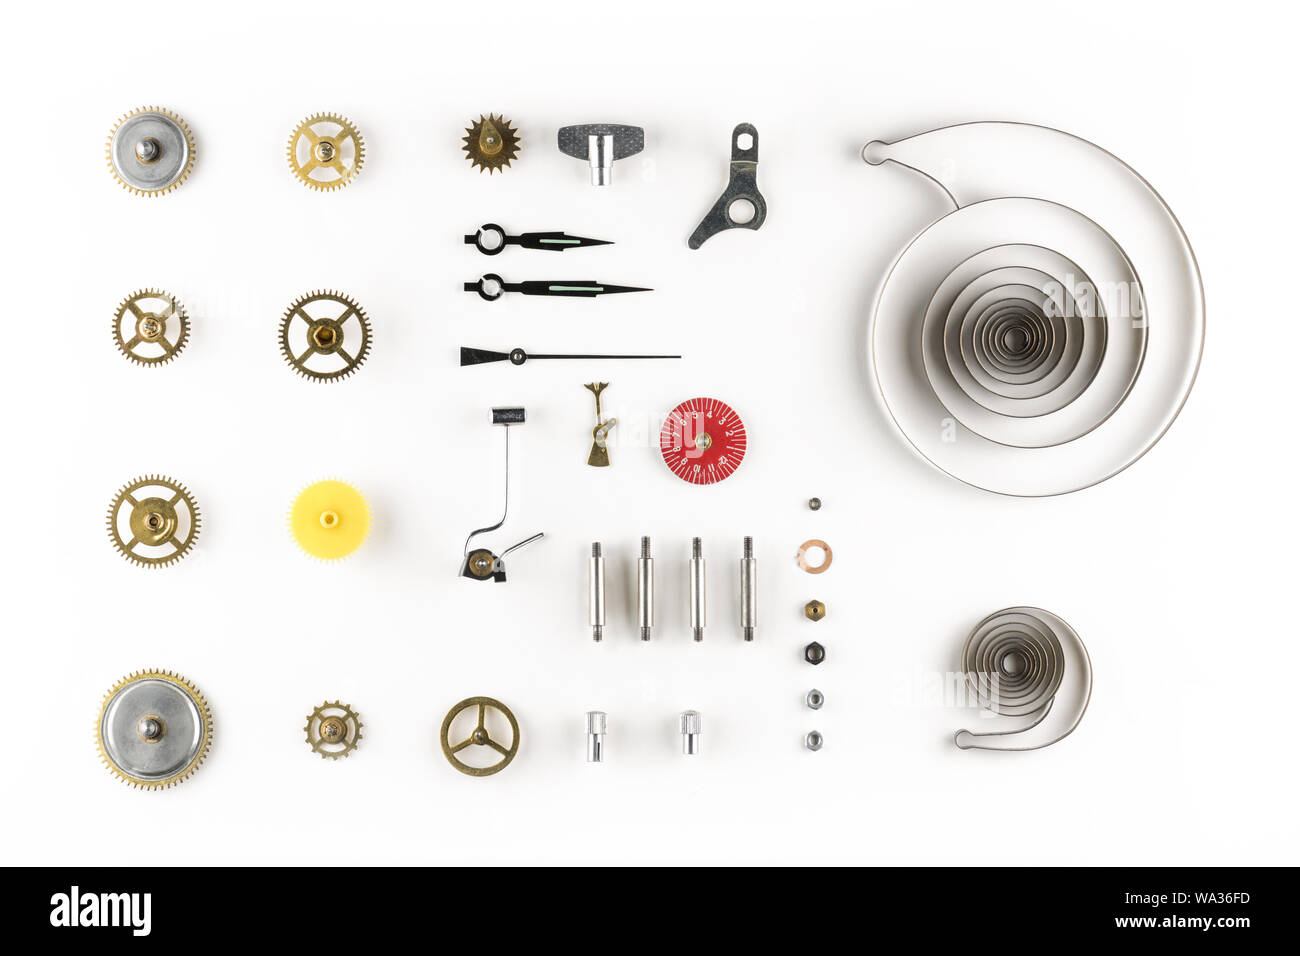 top view of aligned dissassambled parts of a vintage alarm clock mechanism on white background Stock Photo